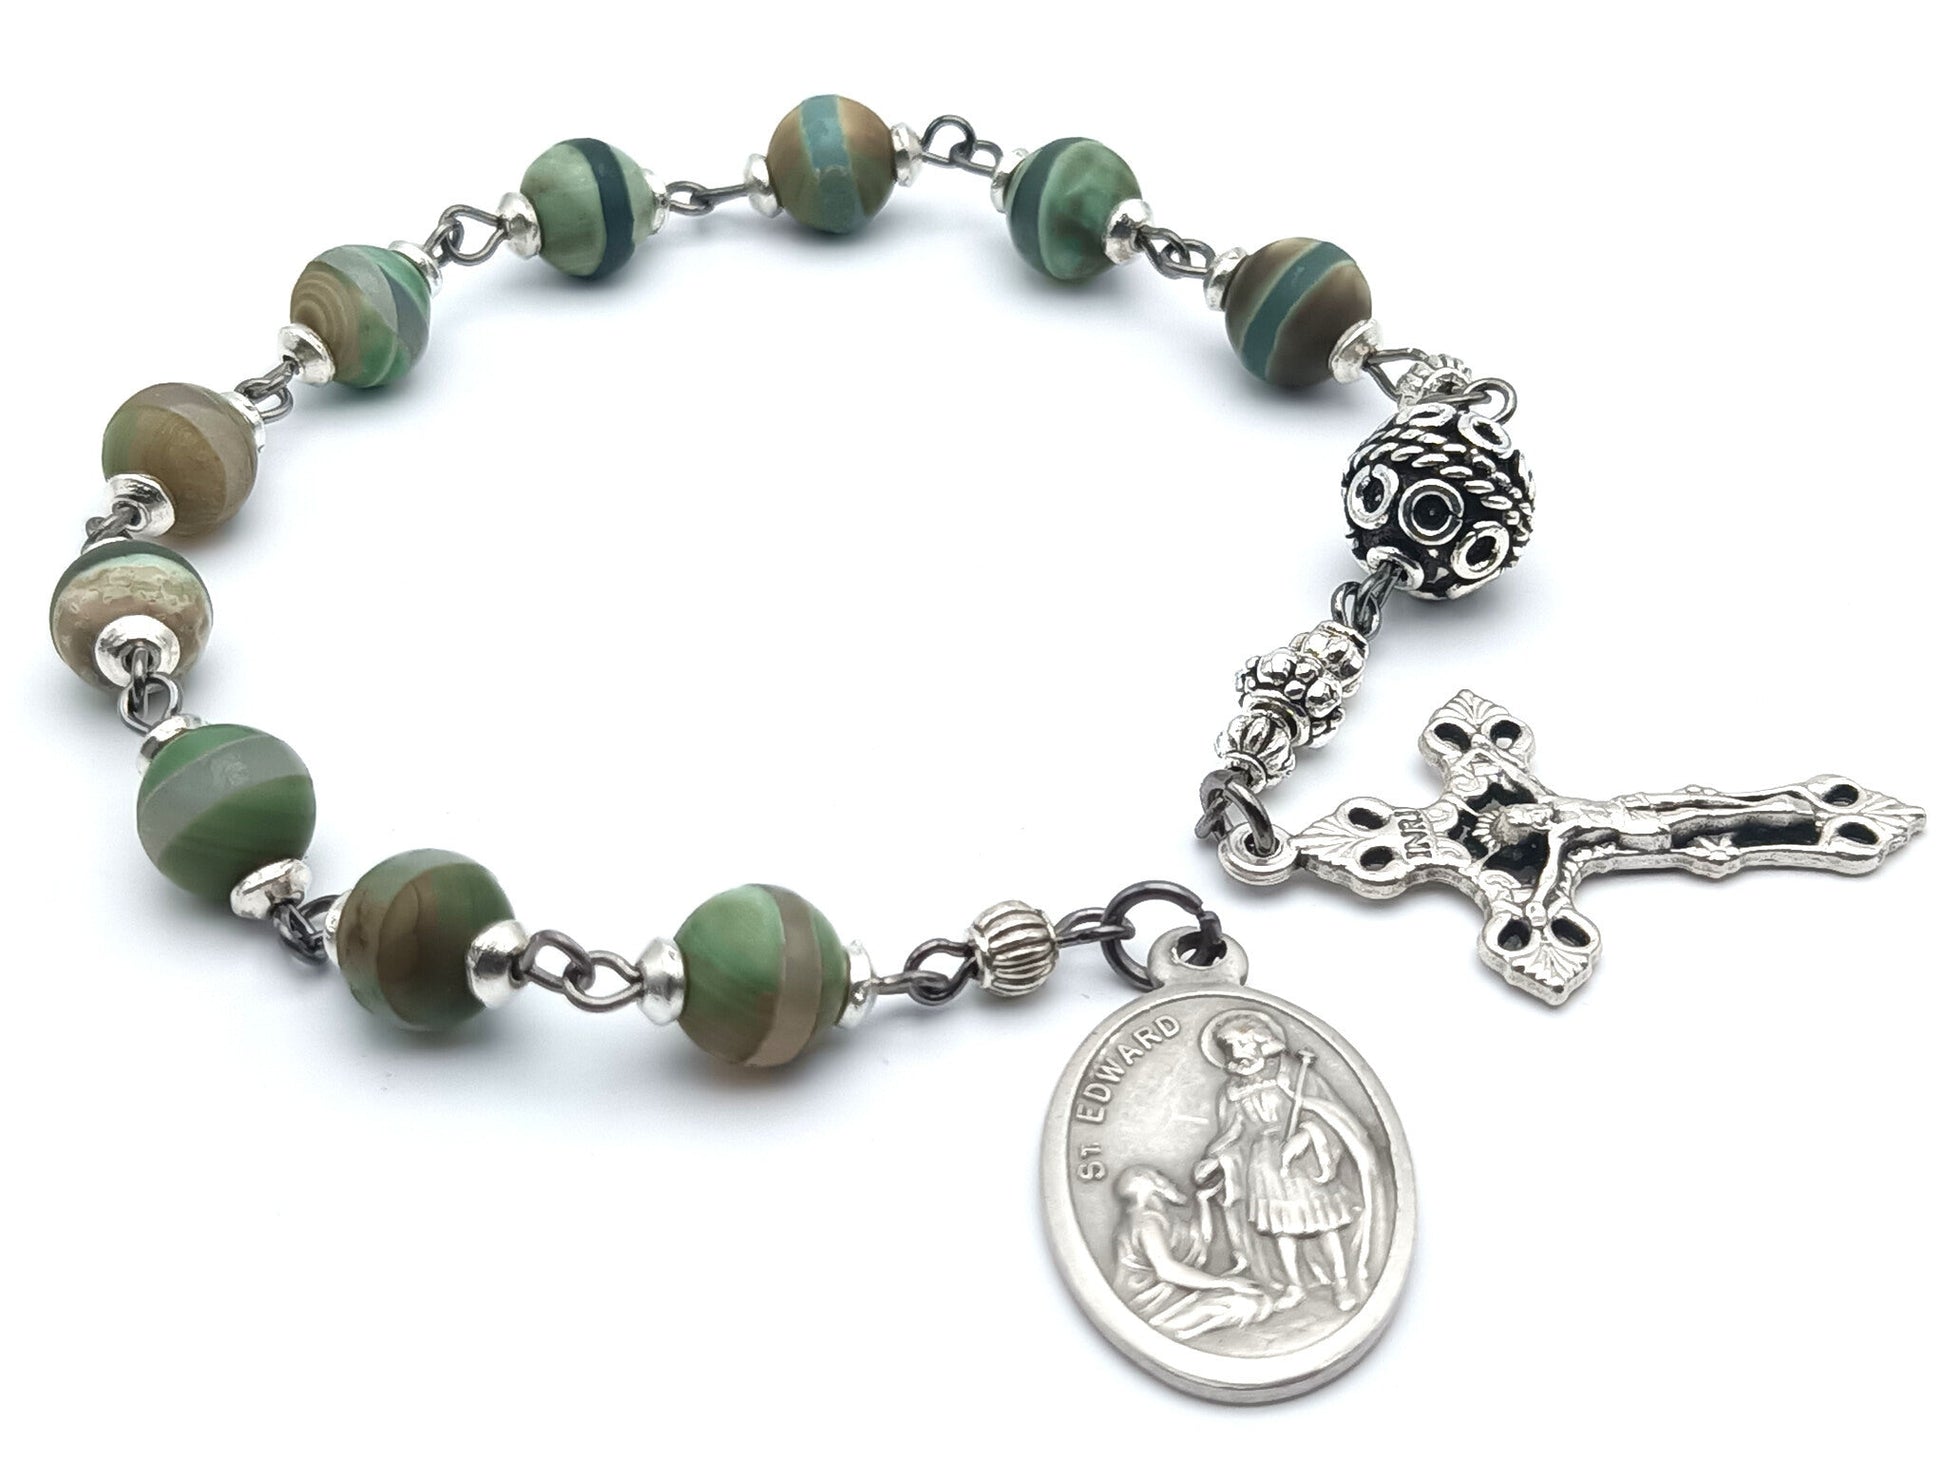 Saint Edward unique rosary beads single decade or tenner rosary with green agate gemstone beads, silver pater bead, crucifix and Saint Edward medal.